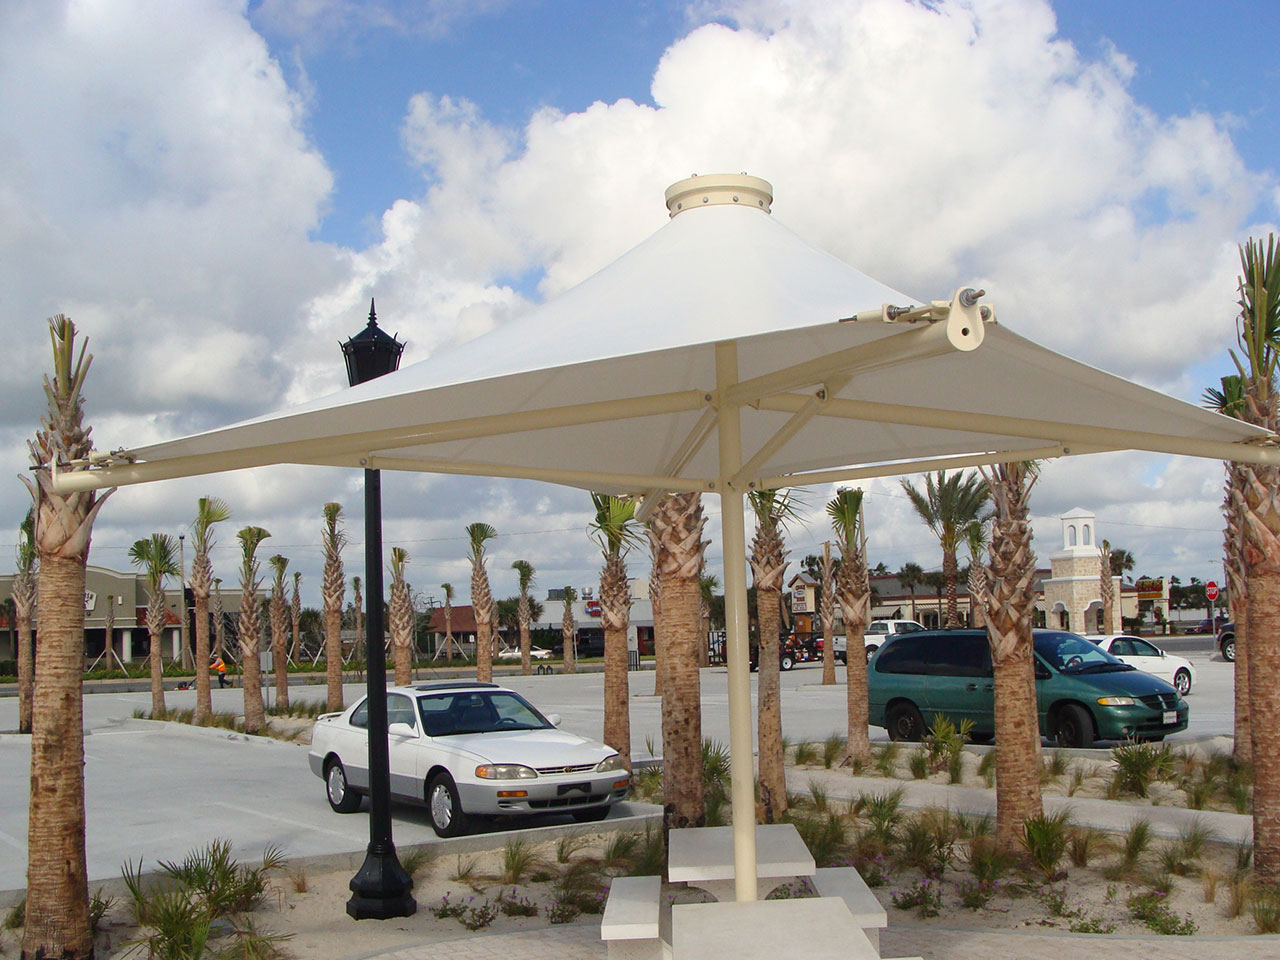 Shade structure at a rest area in parking lot